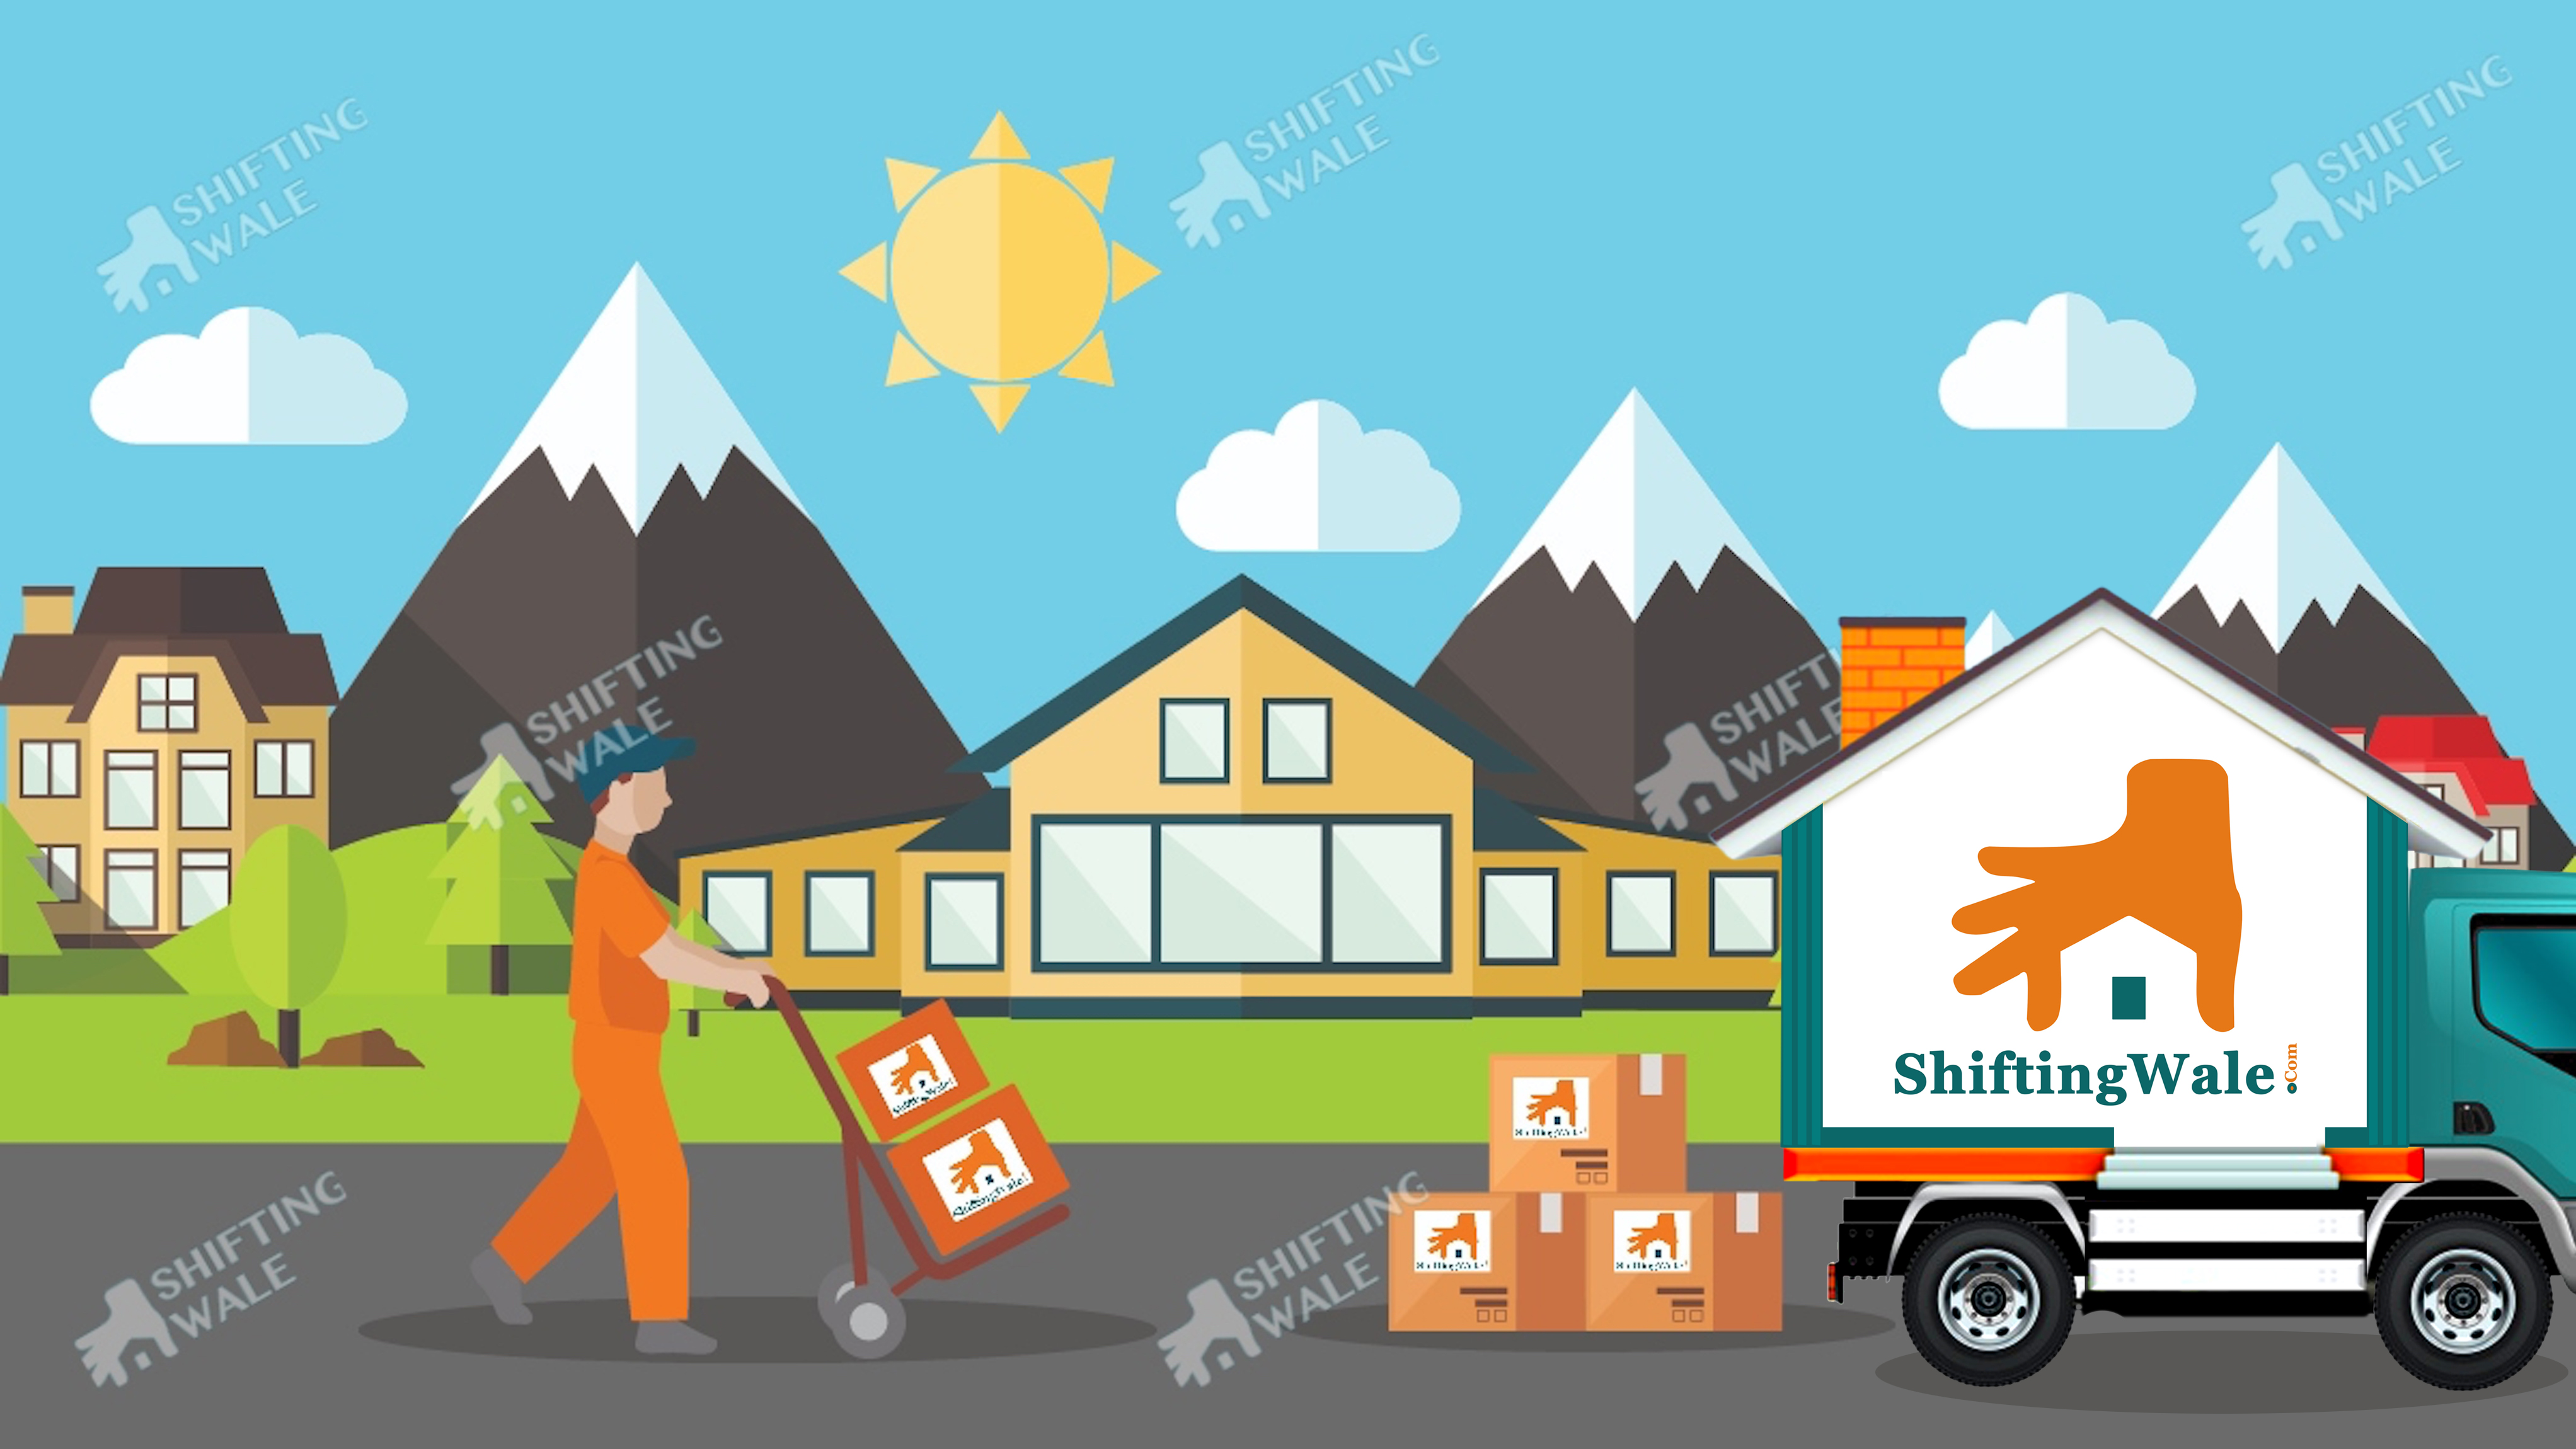 Must Check Company Profile Before Choosing Packers and Movers Services